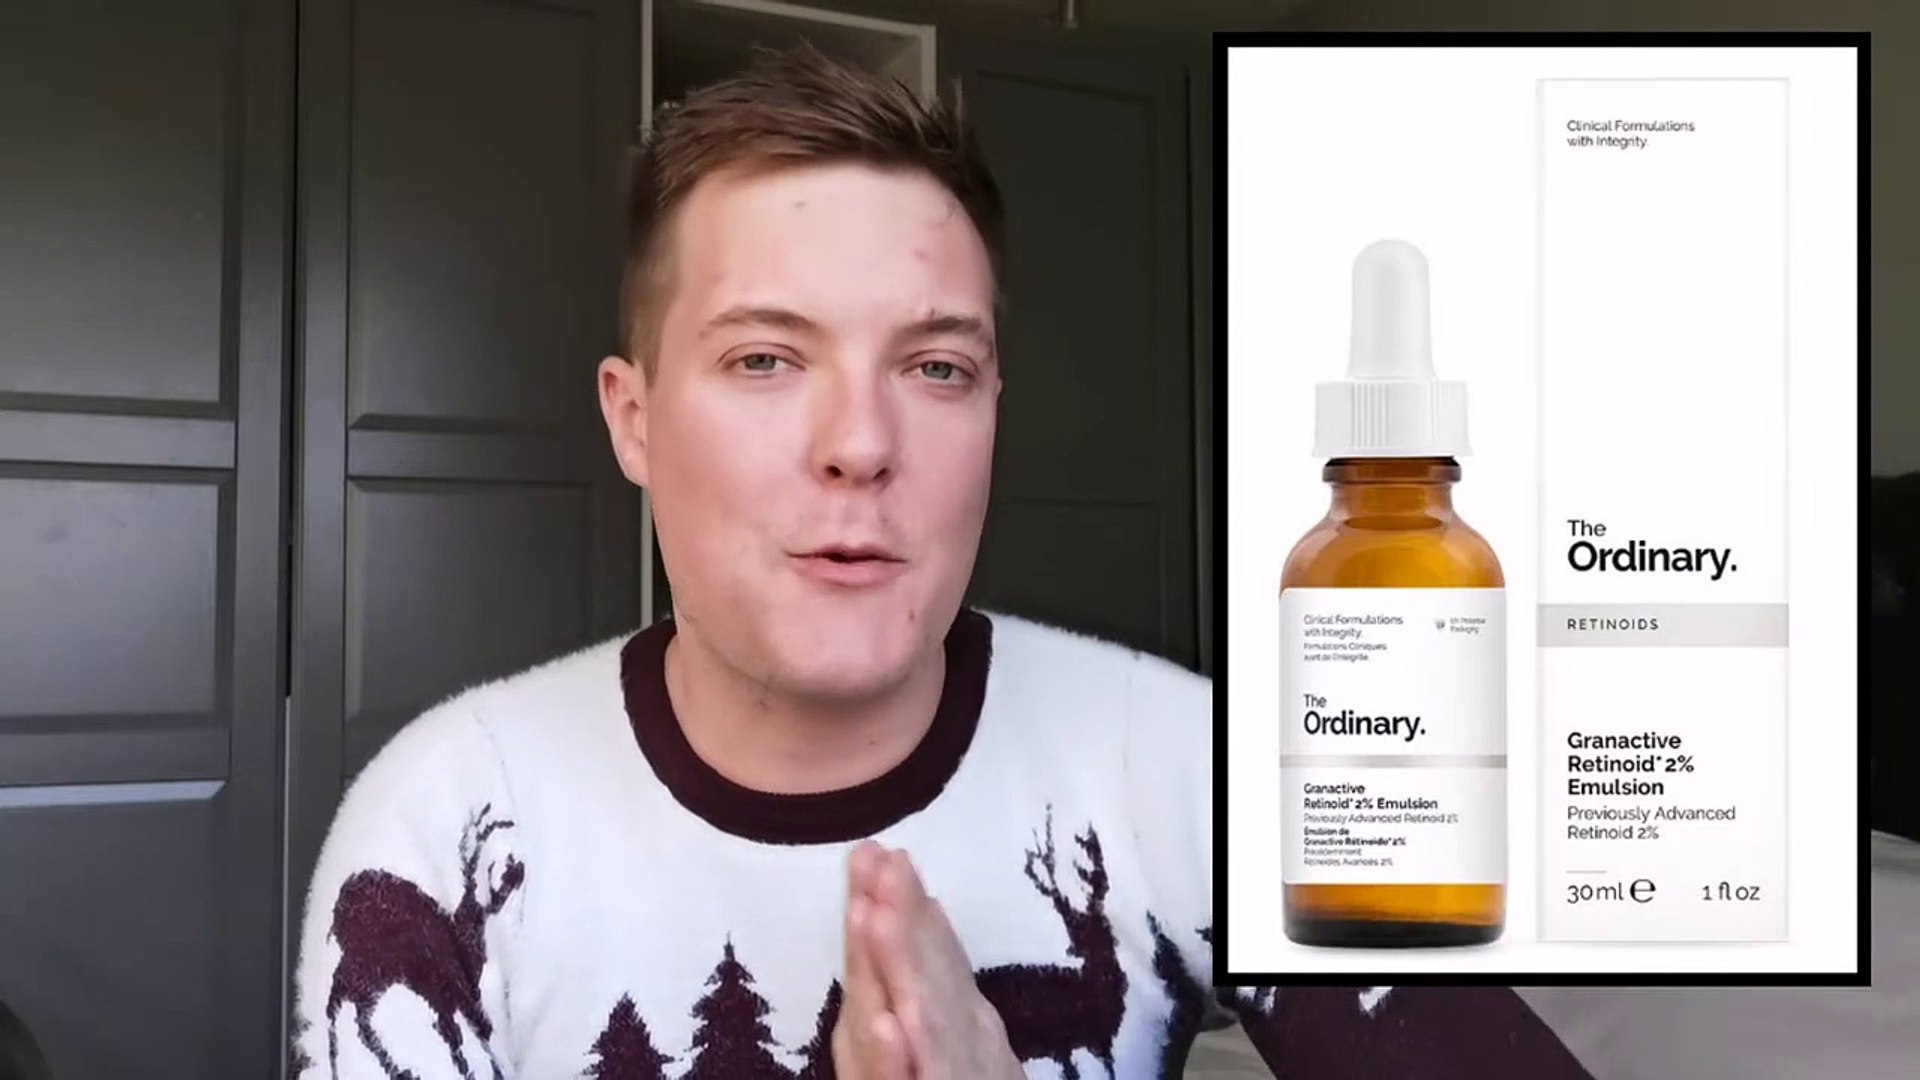 I Tested The Ordinary Granactive Retinoid 2% Emulsion On Oily Skin | The  Ordinary Retinol Reviewed - video Dailymotion